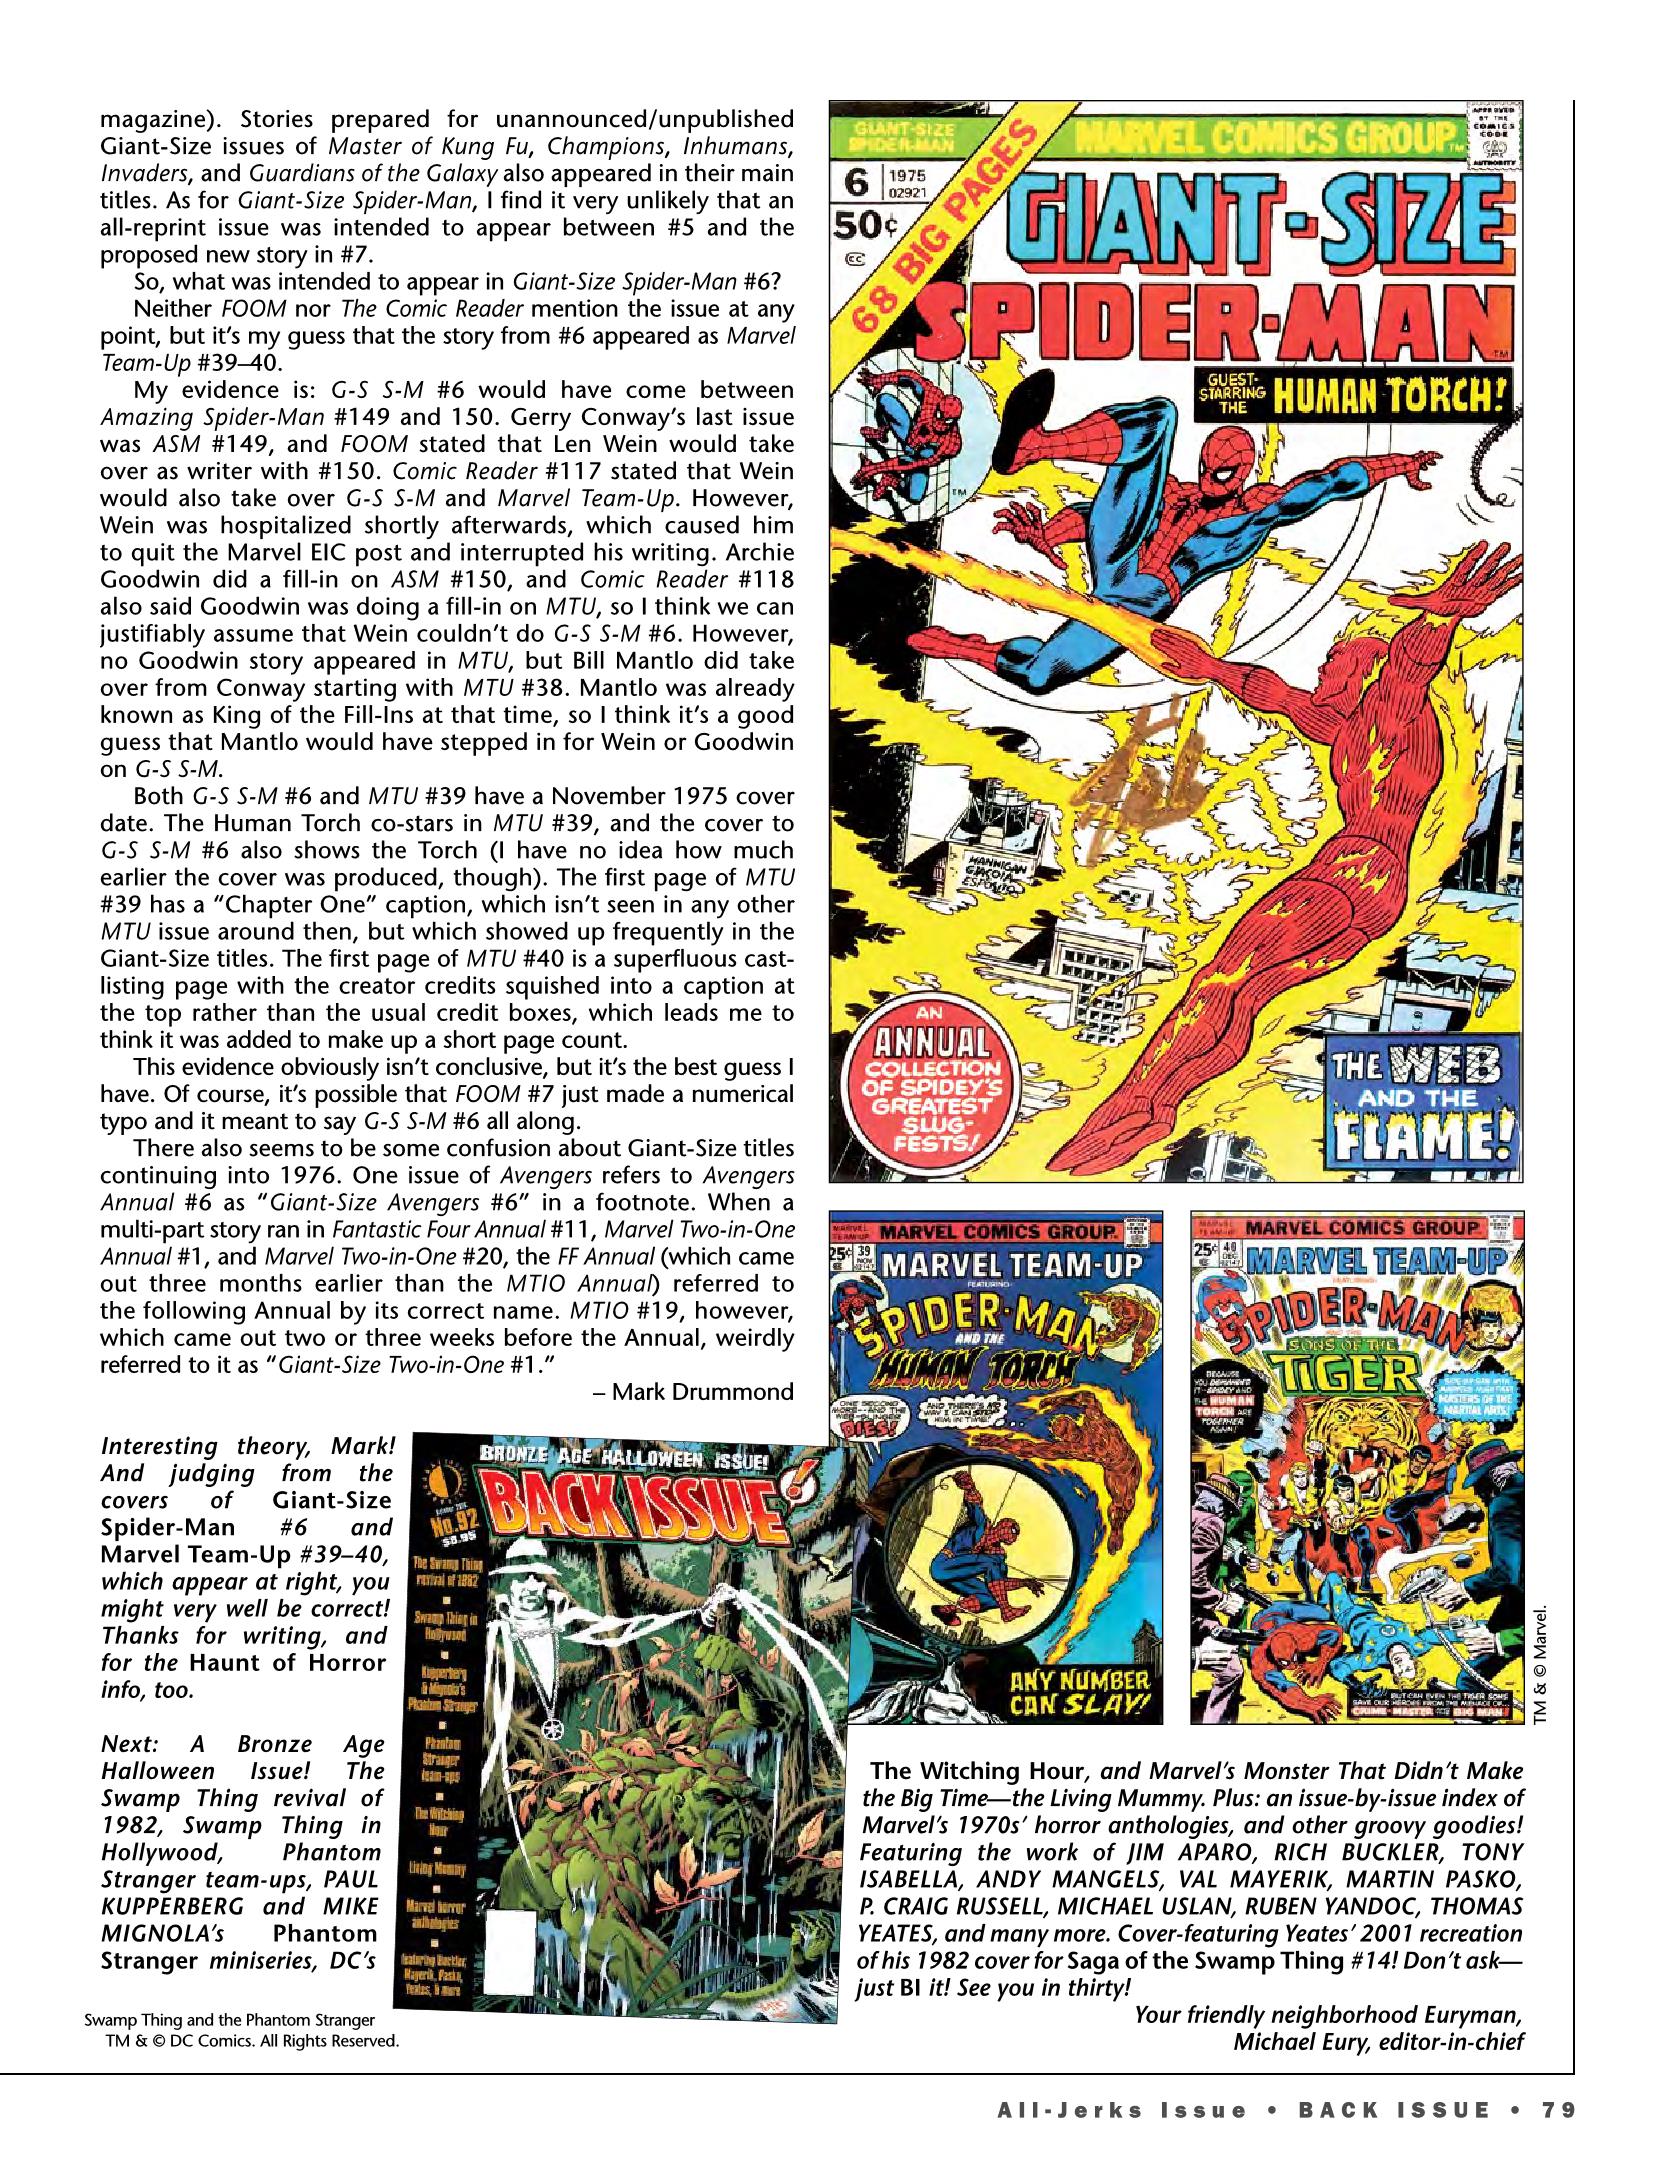 Read online Back Issue comic -  Issue #91 - 80